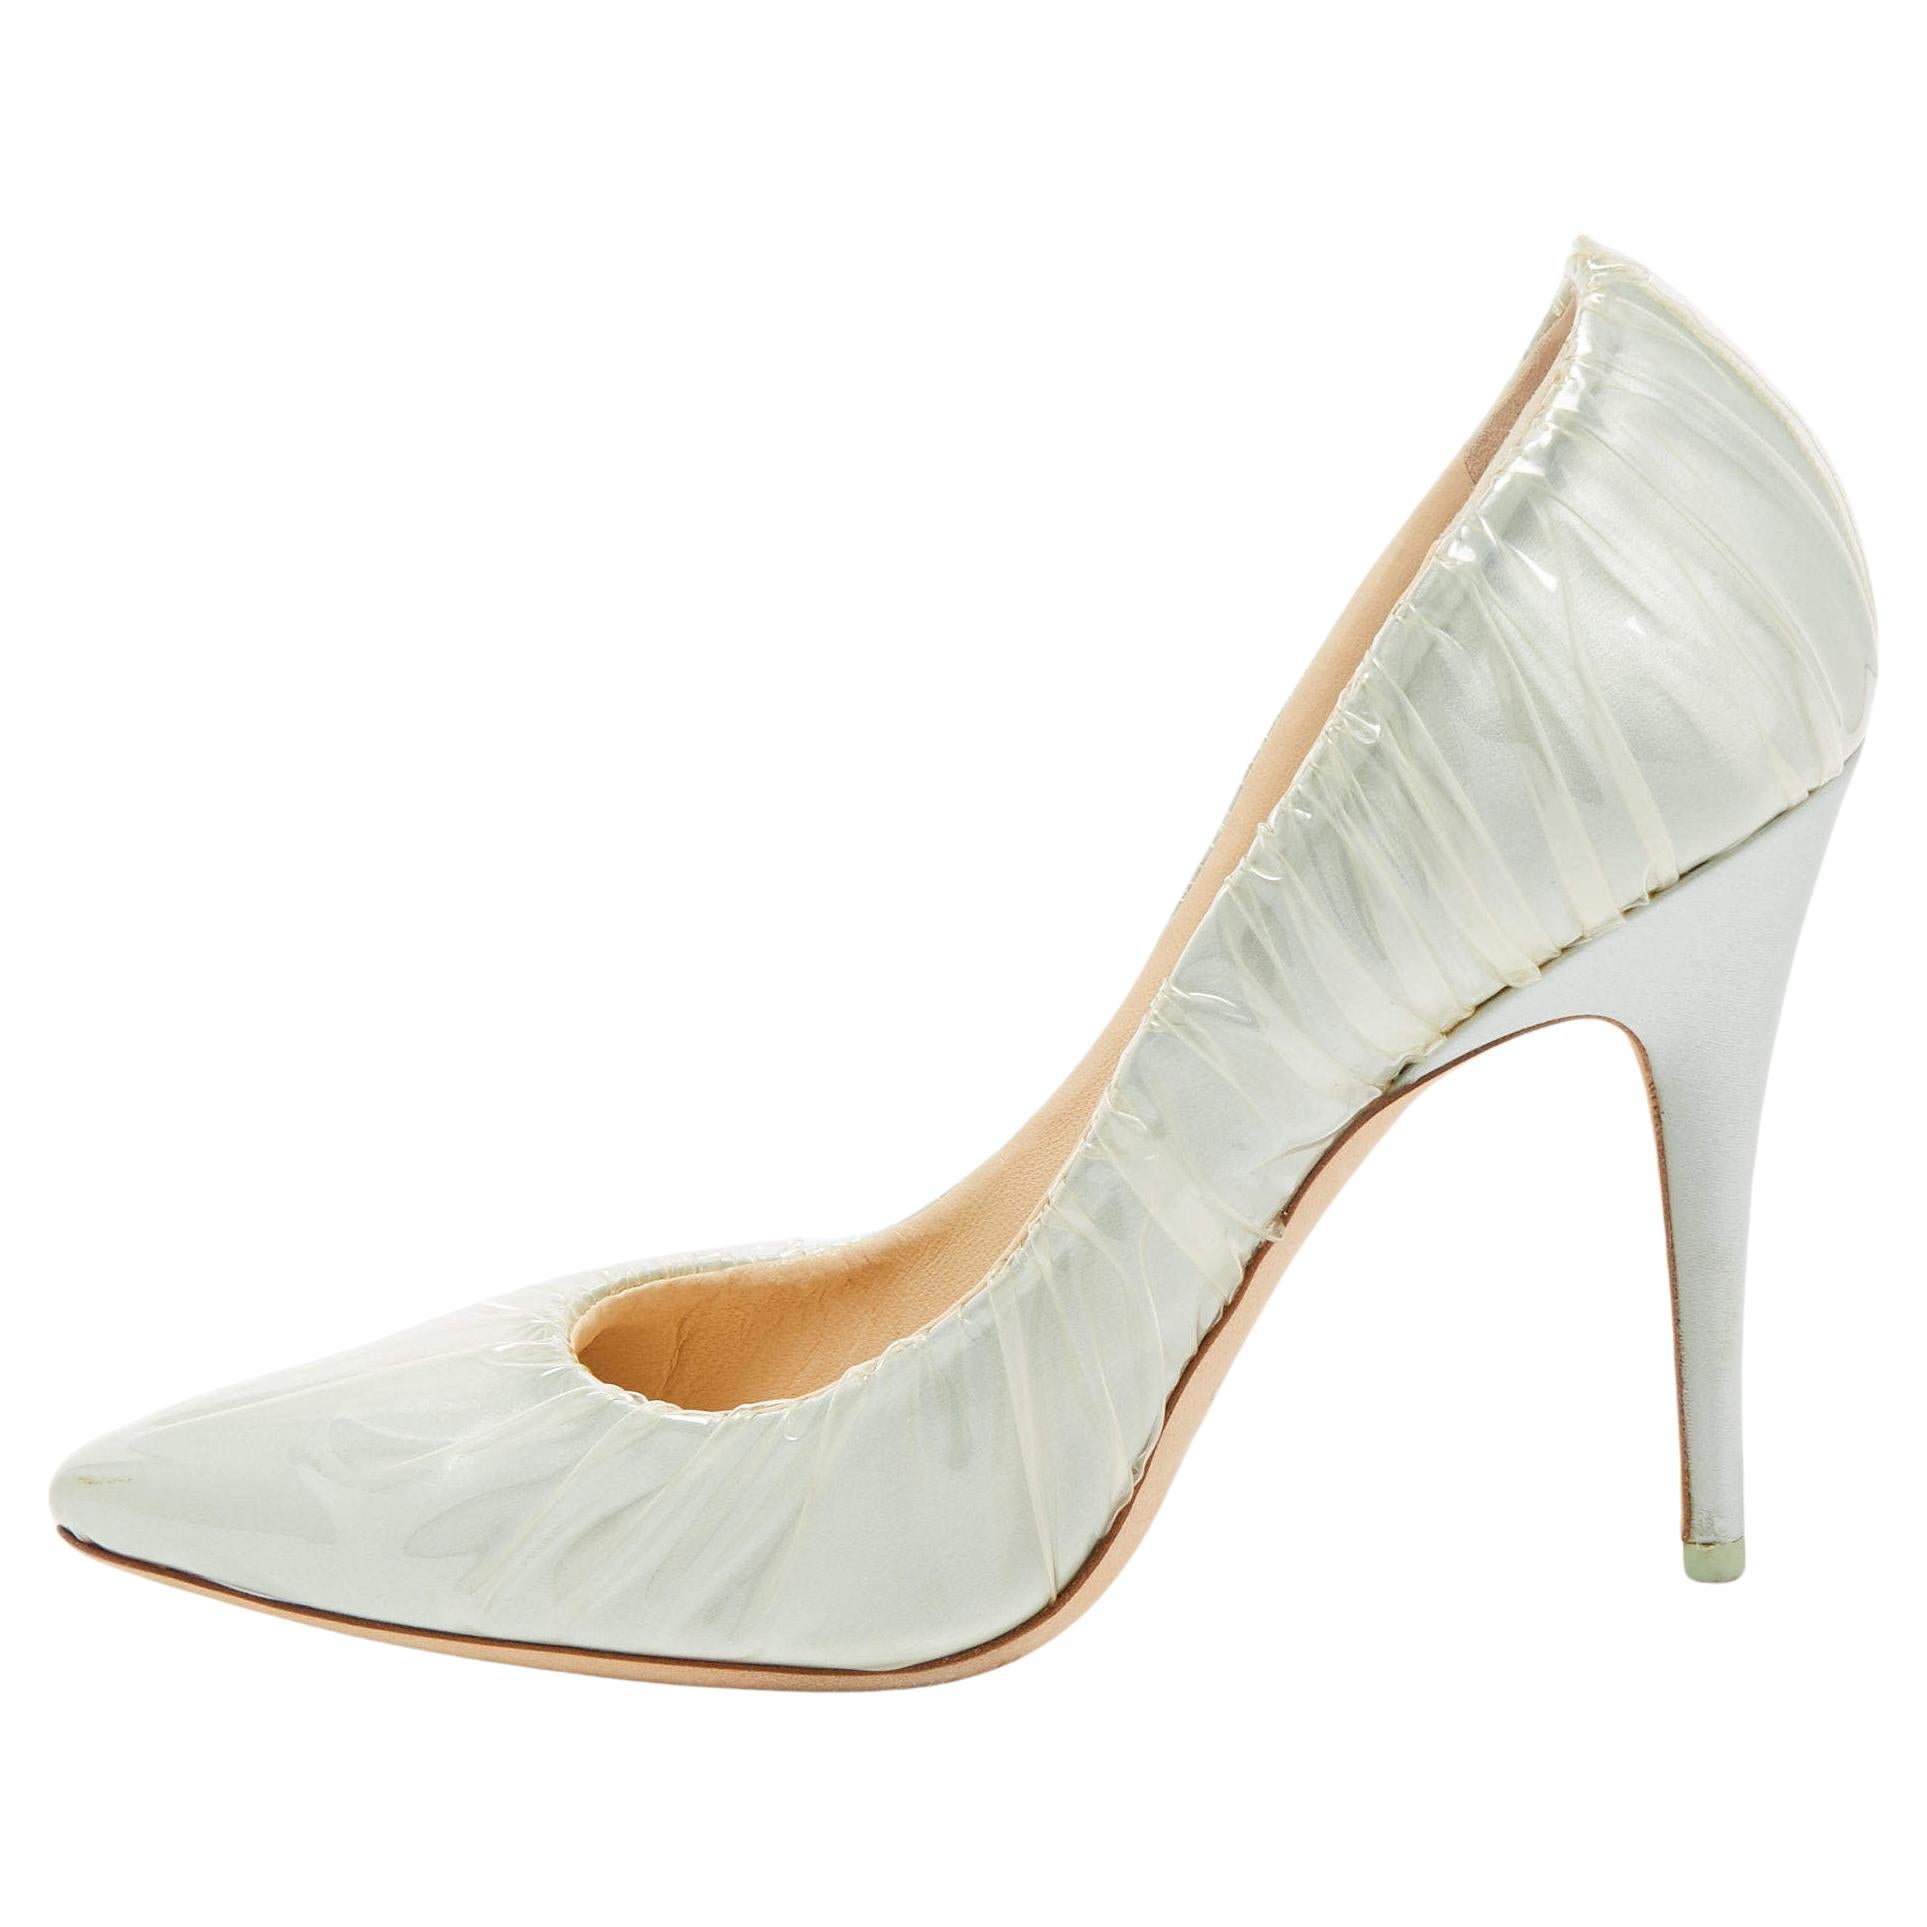 Jimmy Choo x Off-White Light Green Satin and Pleated PVC Anne Pumps Size 41 For Sale